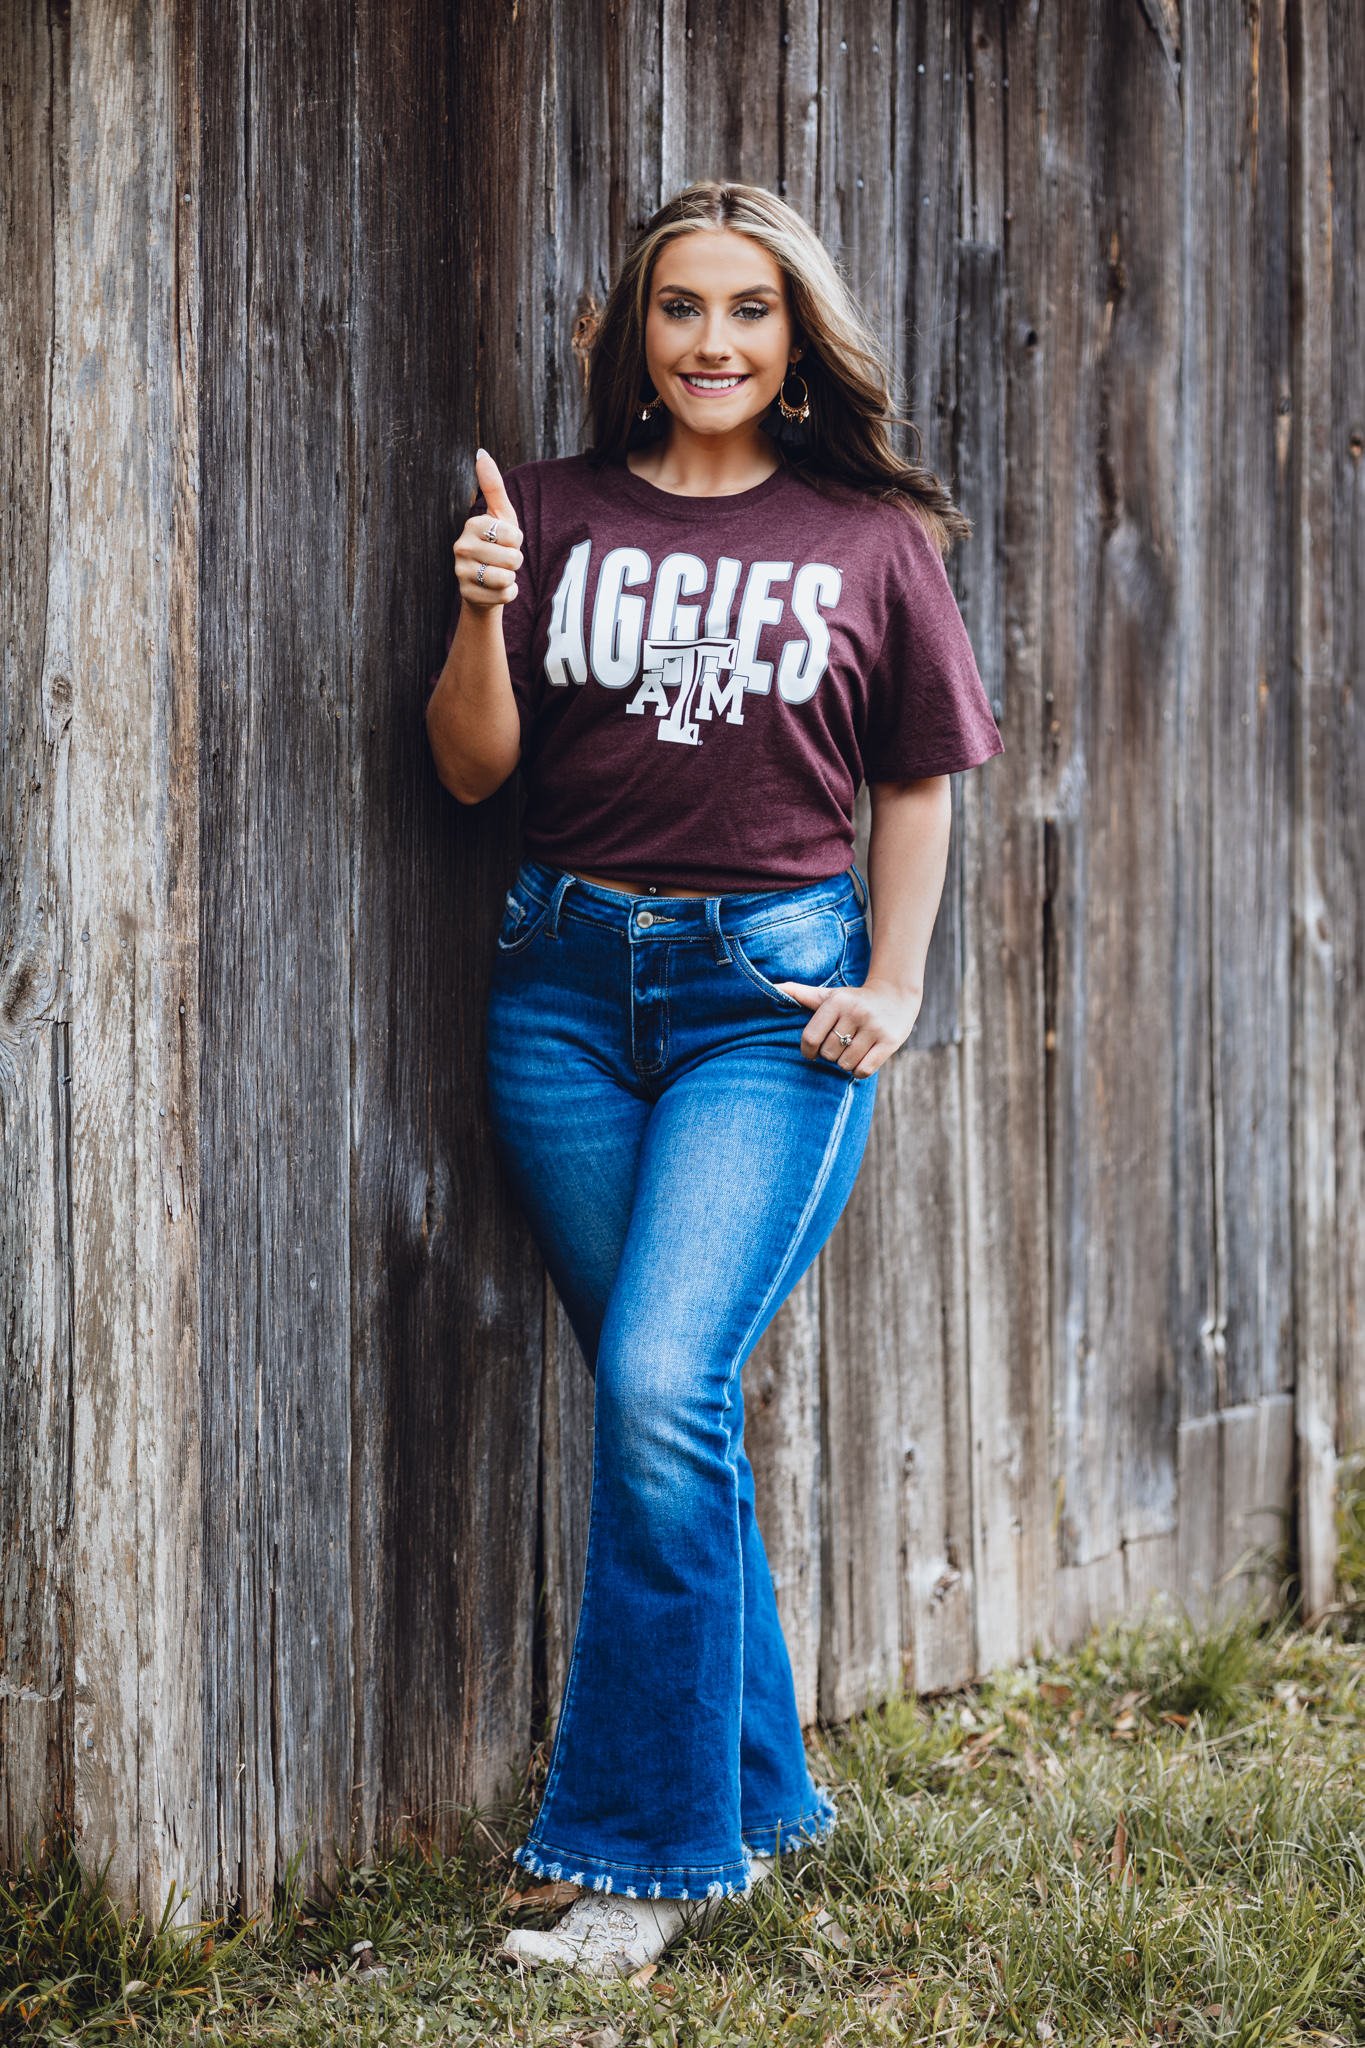 senior girl college Texas a&amp;m shirt western boots jeans